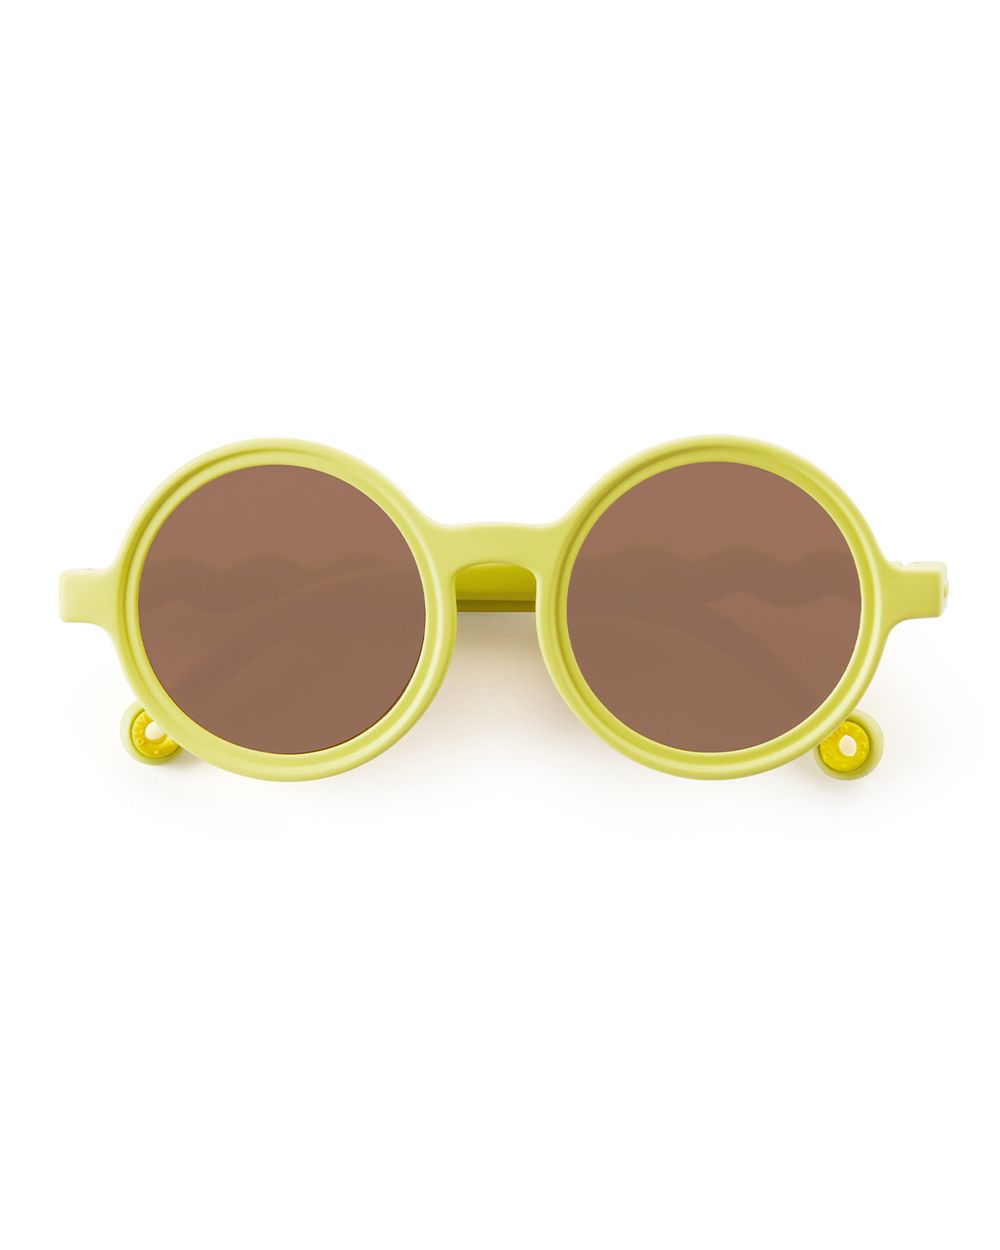 Toddler, Kids, Junior and Adult Sunglasses Lime Green